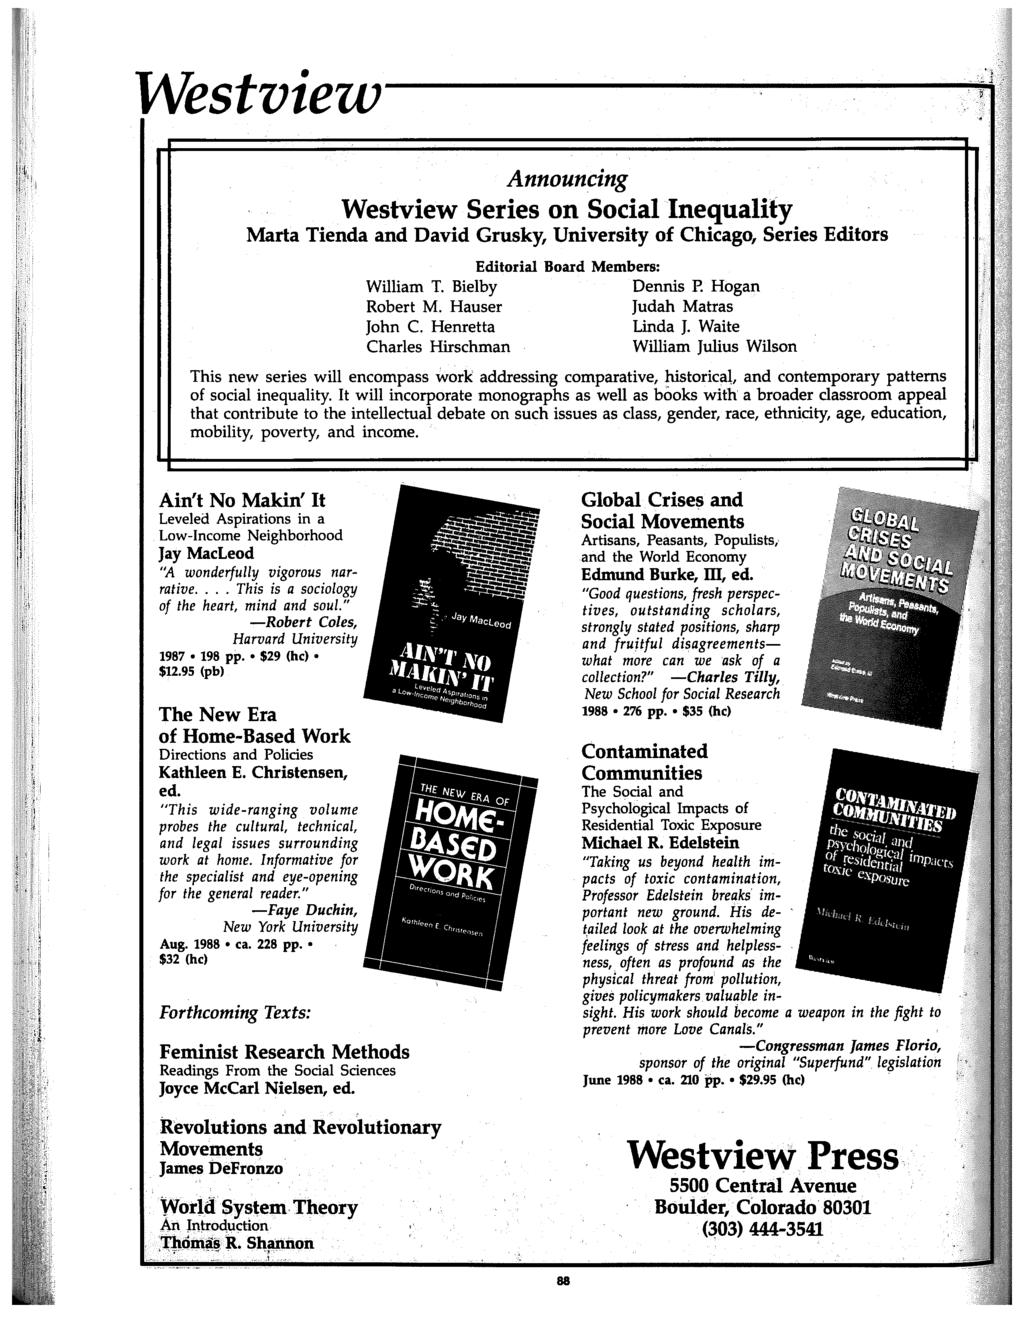 Westview--------~ Announcing Westview Series on Social Inequality Marta Tienda and David Grusky, University of Chicago, Series Editors Editorial Board Members: William T. Bielby Dennis P.